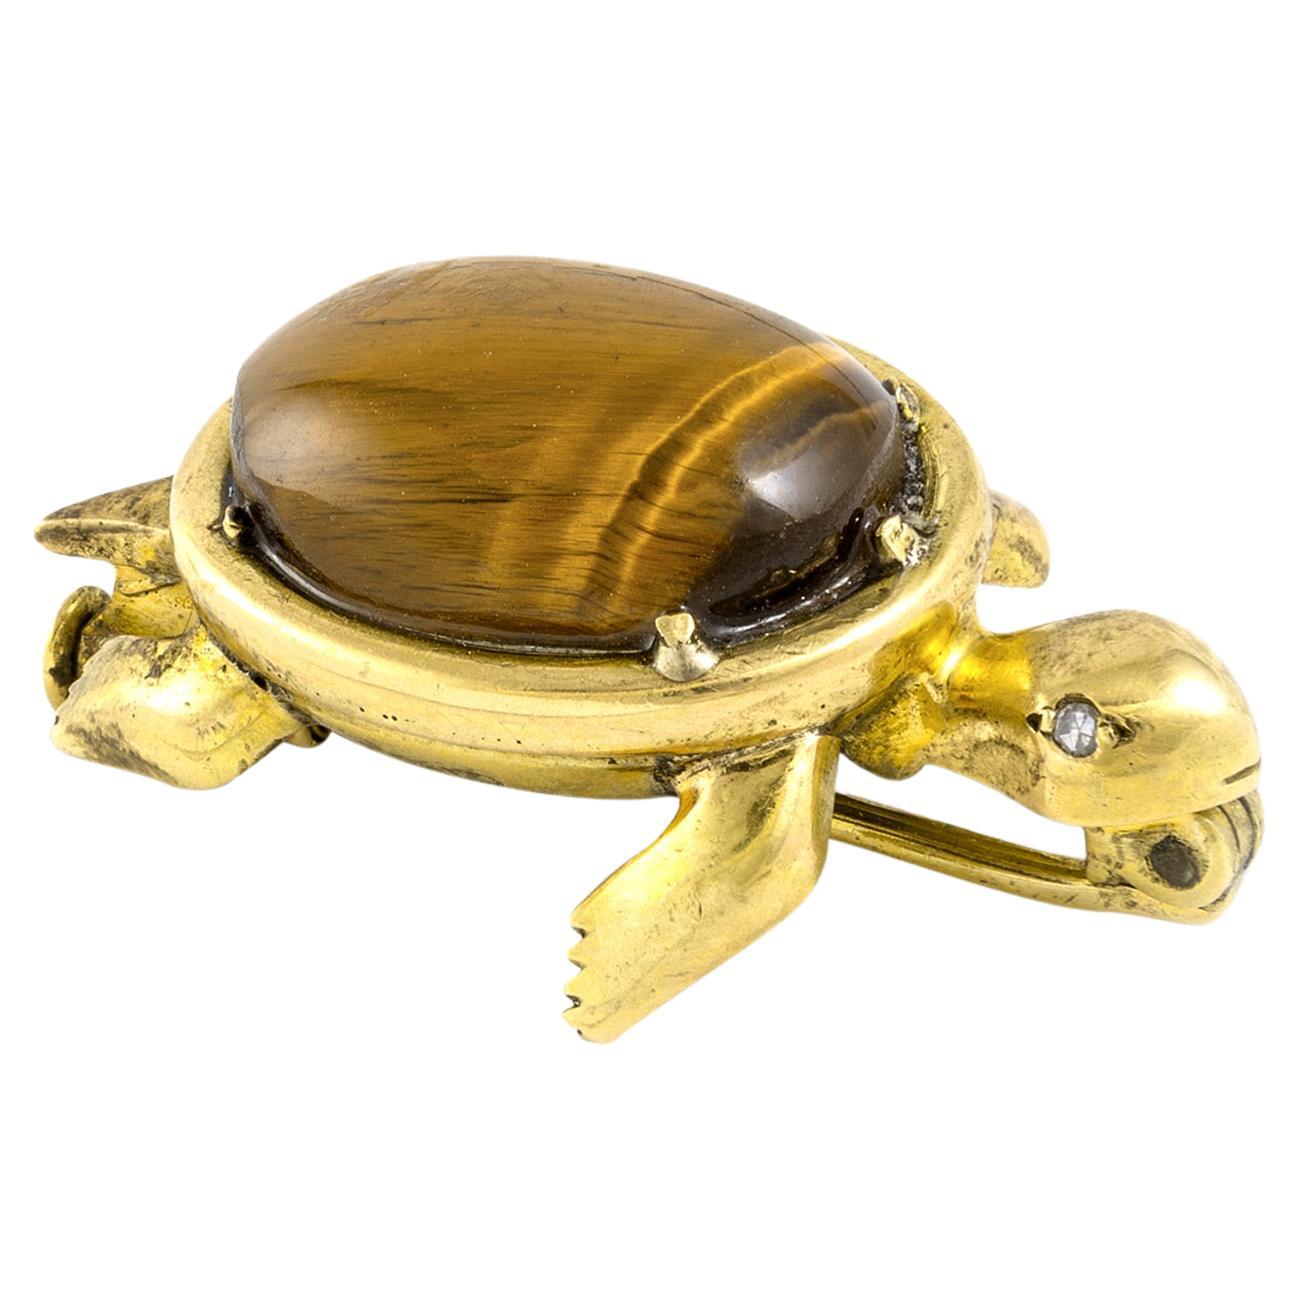 The 1960's French Cat’s Eye Cabochon on Yellow Gold 18k Turtle Brooch Clip is a stunning and sophisticated accessory that exudes elegance.

This brooch features a beautiful cat’s eye cabochon, a type of gemstone known for its mesmerizing chatoyant